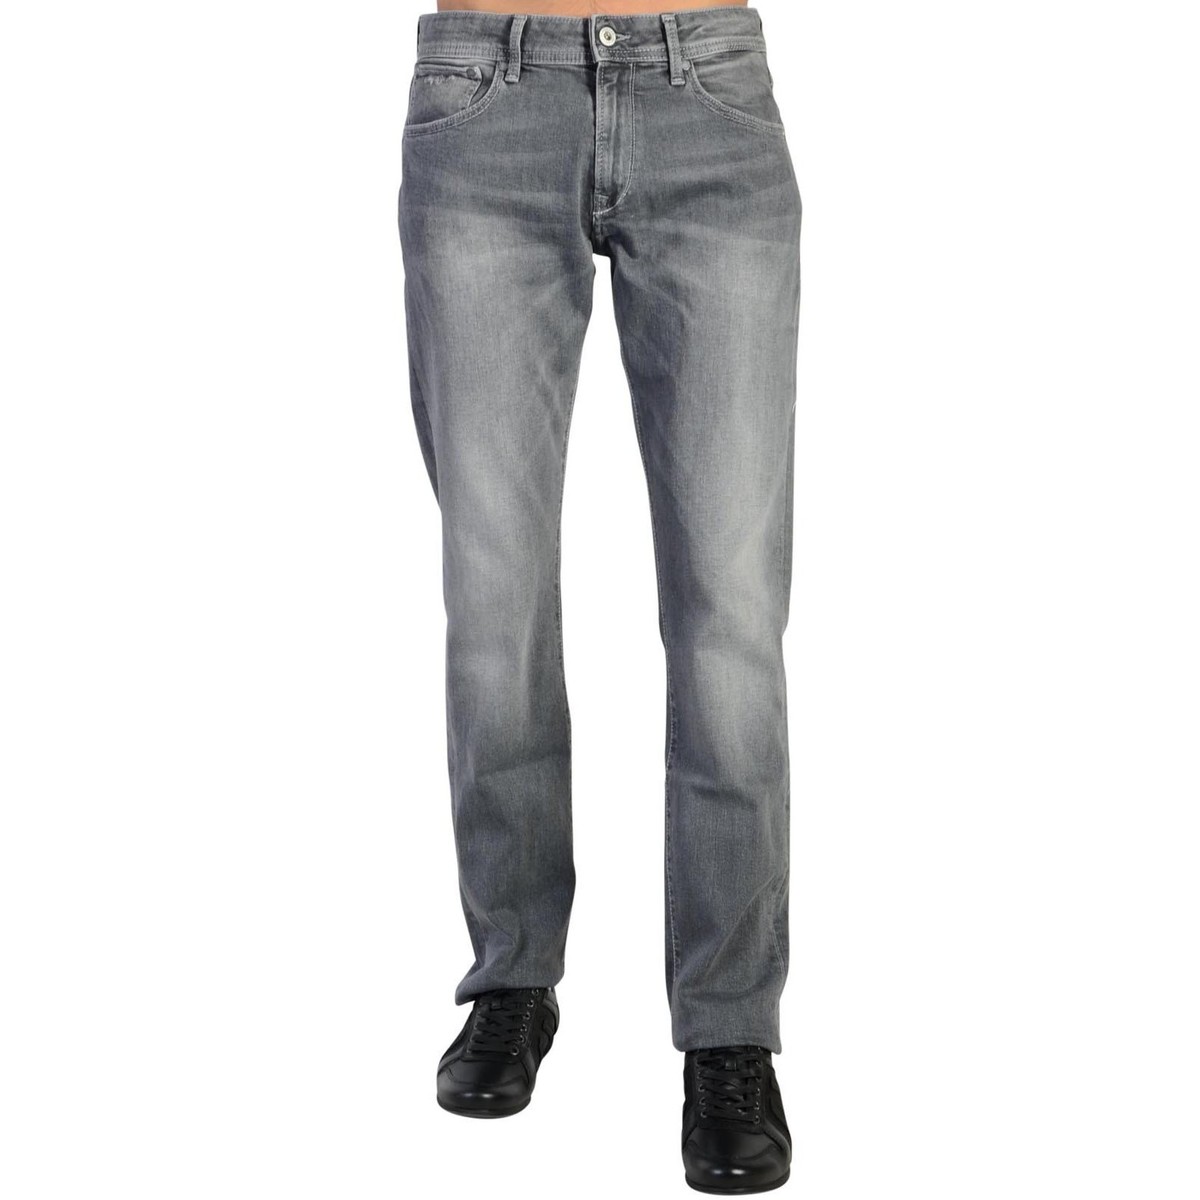 Jeans Pepe jeans 99610